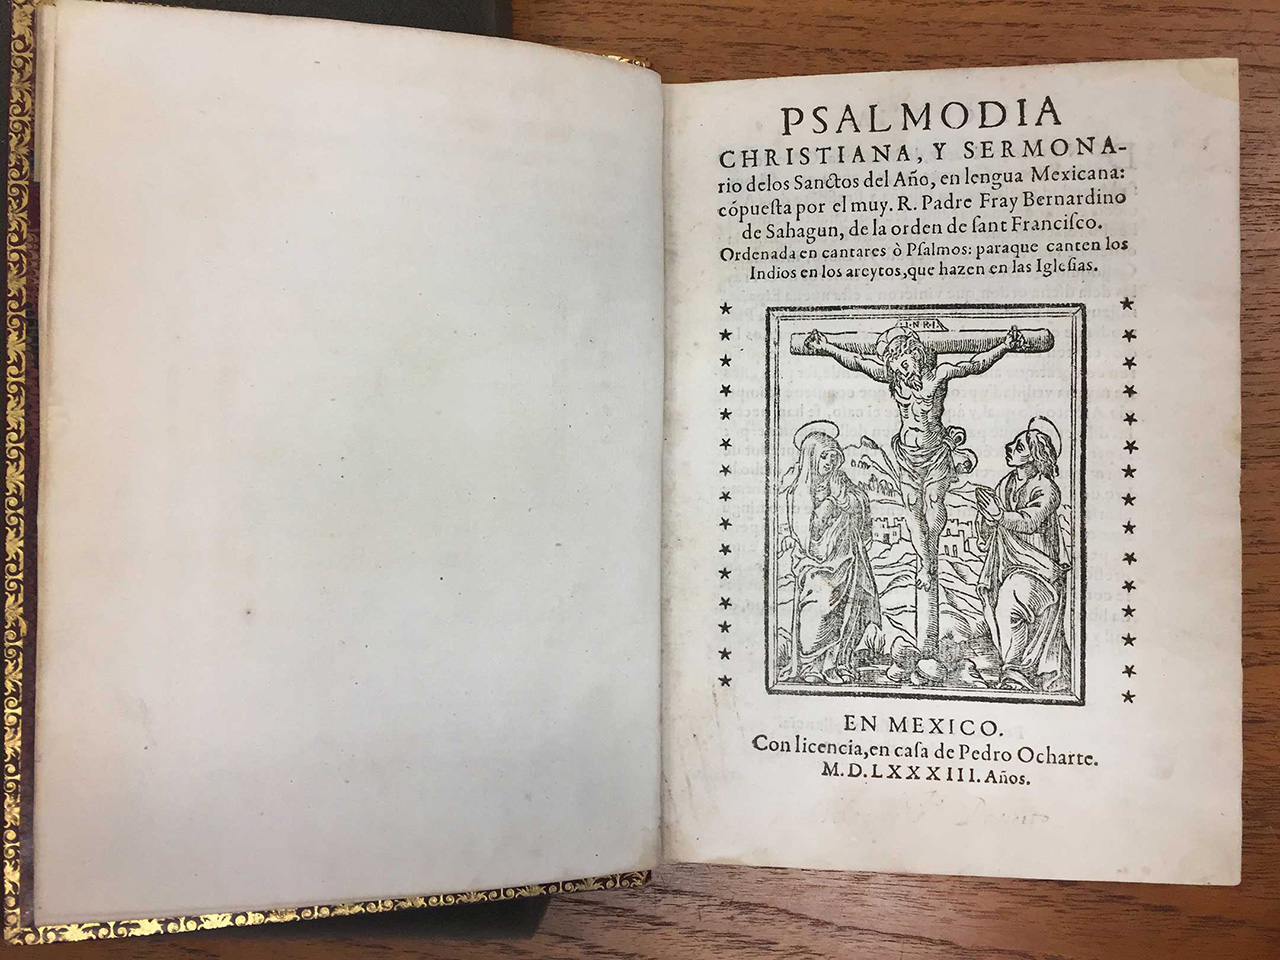 (Fig 07) Christian Psalmody, and Sermons of the Saints of the Year, in Mexican Language, 1583. Printing House of Pedro Ocharte.